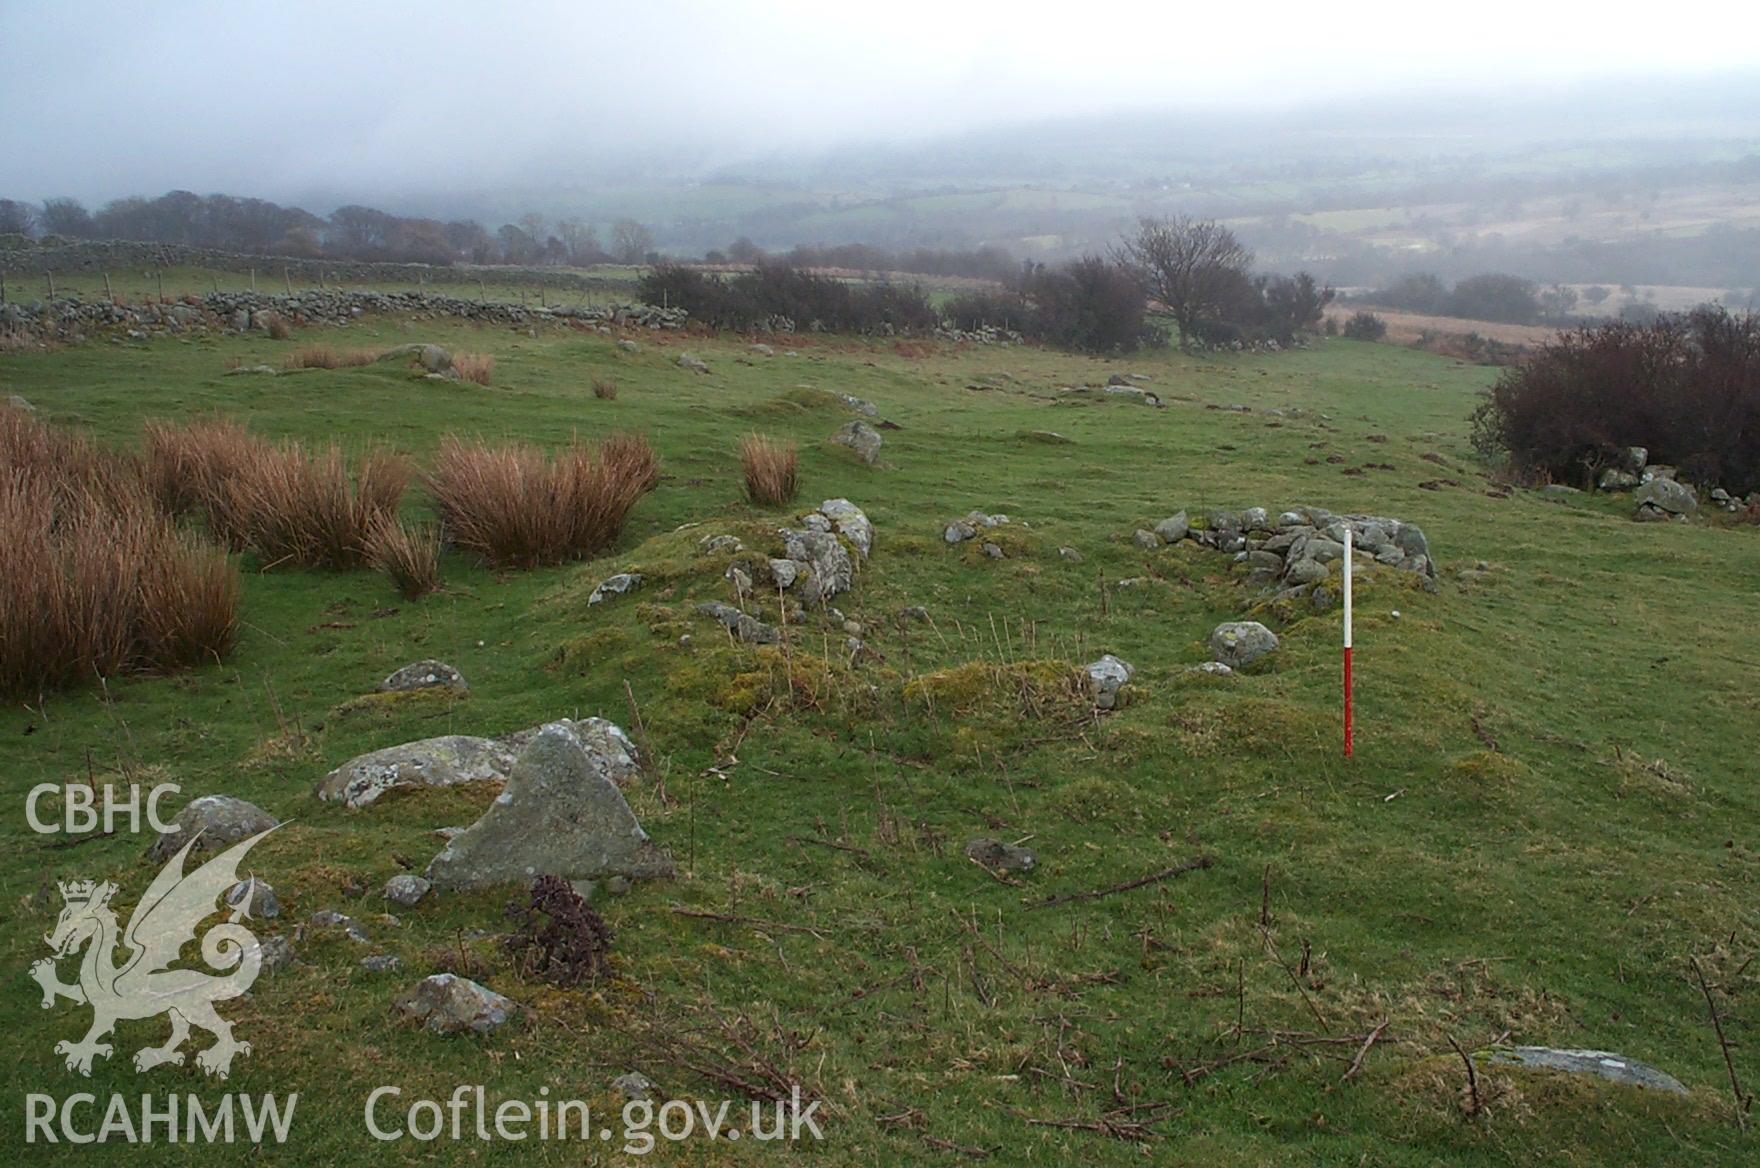 Digital photograph of Enclosure Rowen from the South. Taken by P. Schofield on 30/03/2004 during the Eastern Snowdonia (North) Upland Survey.